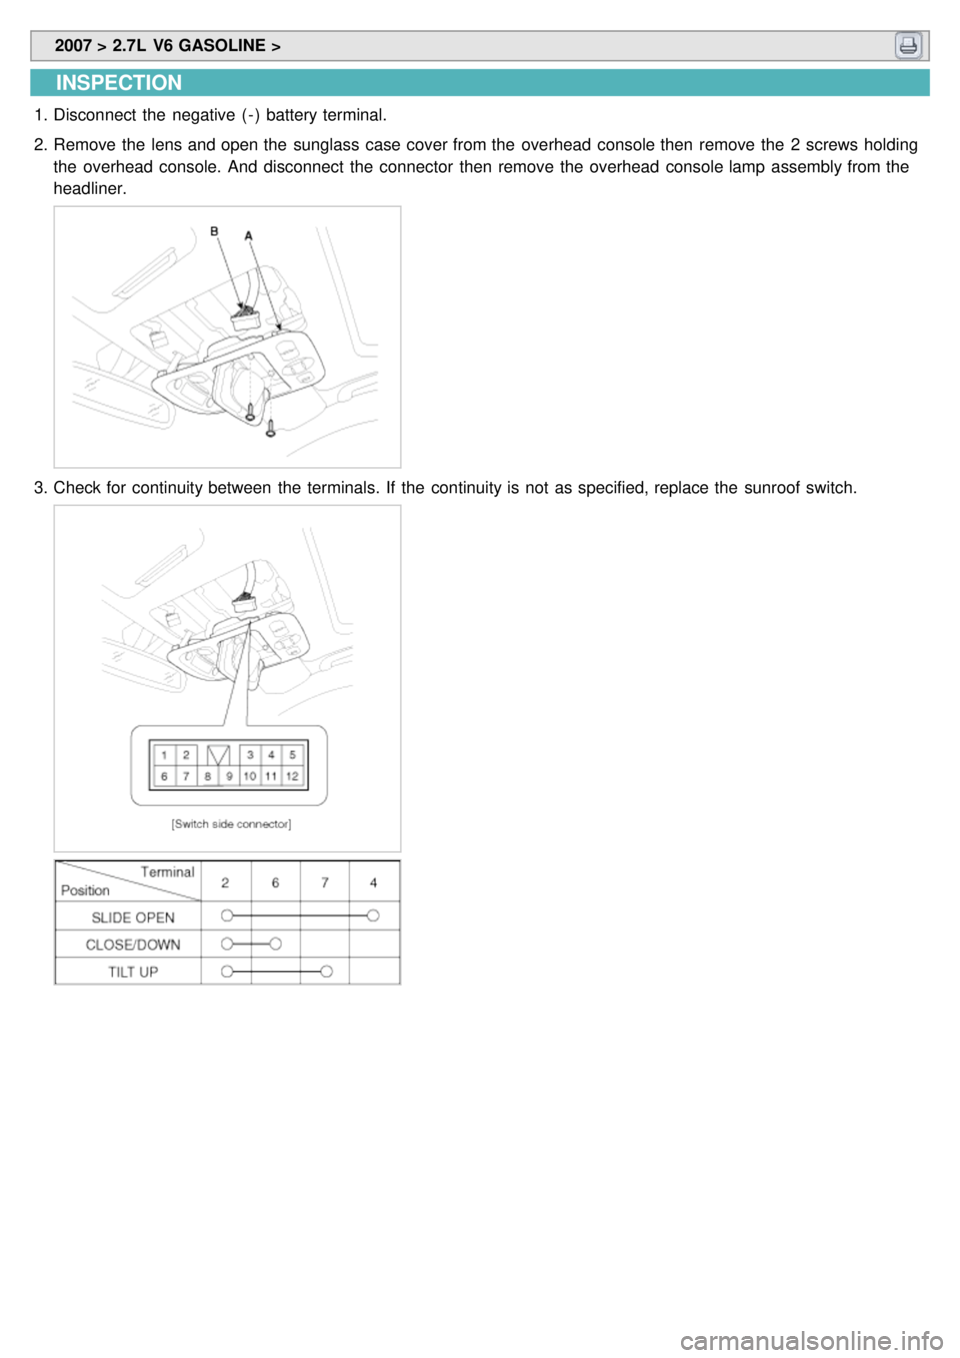 KIA CARNIVAL 2007  Workshop Manual  2007 > 2.7L  V6 GASOLINE > 
INSPECTION
1.Disconnect  the  negative  ( - )  battery terminal.
2. Remove the  lens and open the  sunglass  case cover from the  overhead  console then  remove the  2  sc